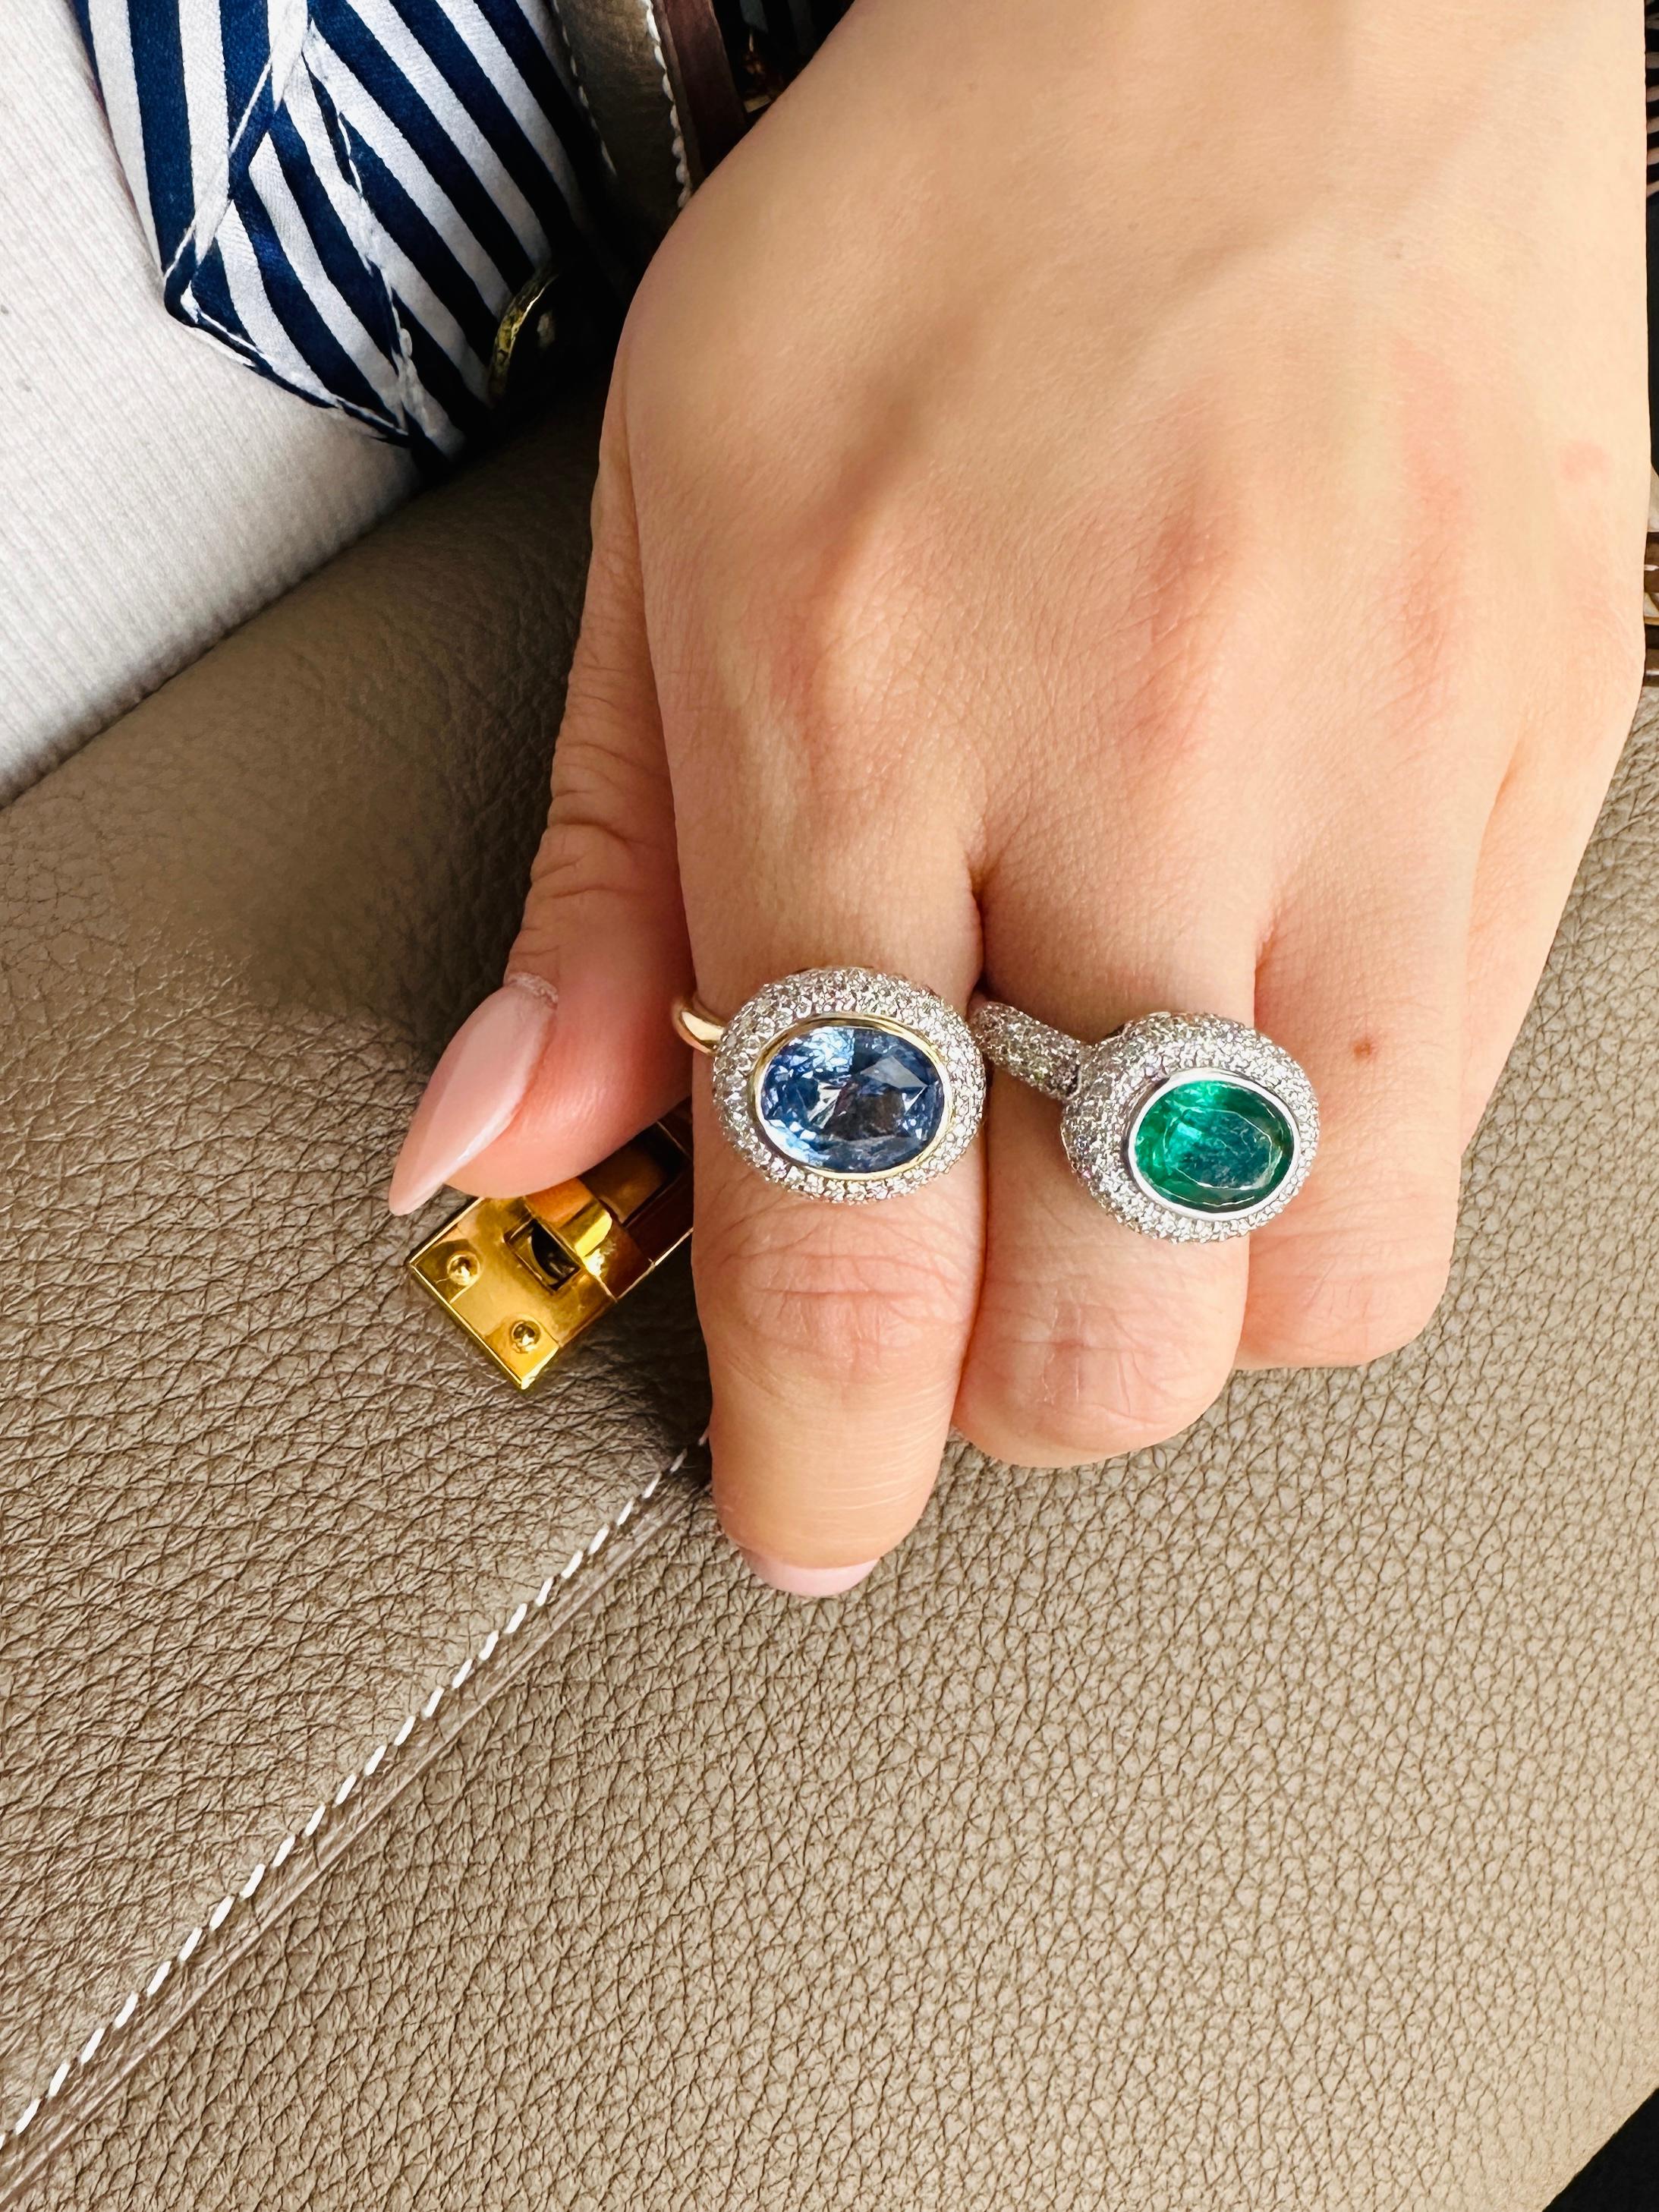 14k White Gold. These any-finger rings include a dazzling OVAL-shaped emerald solitaire of approximately 3ct, pave set blue sapphire petals in a lotus motif, and pave set brilliant cut white diamonds. Rinoor's re-imagined rings, are incredibly